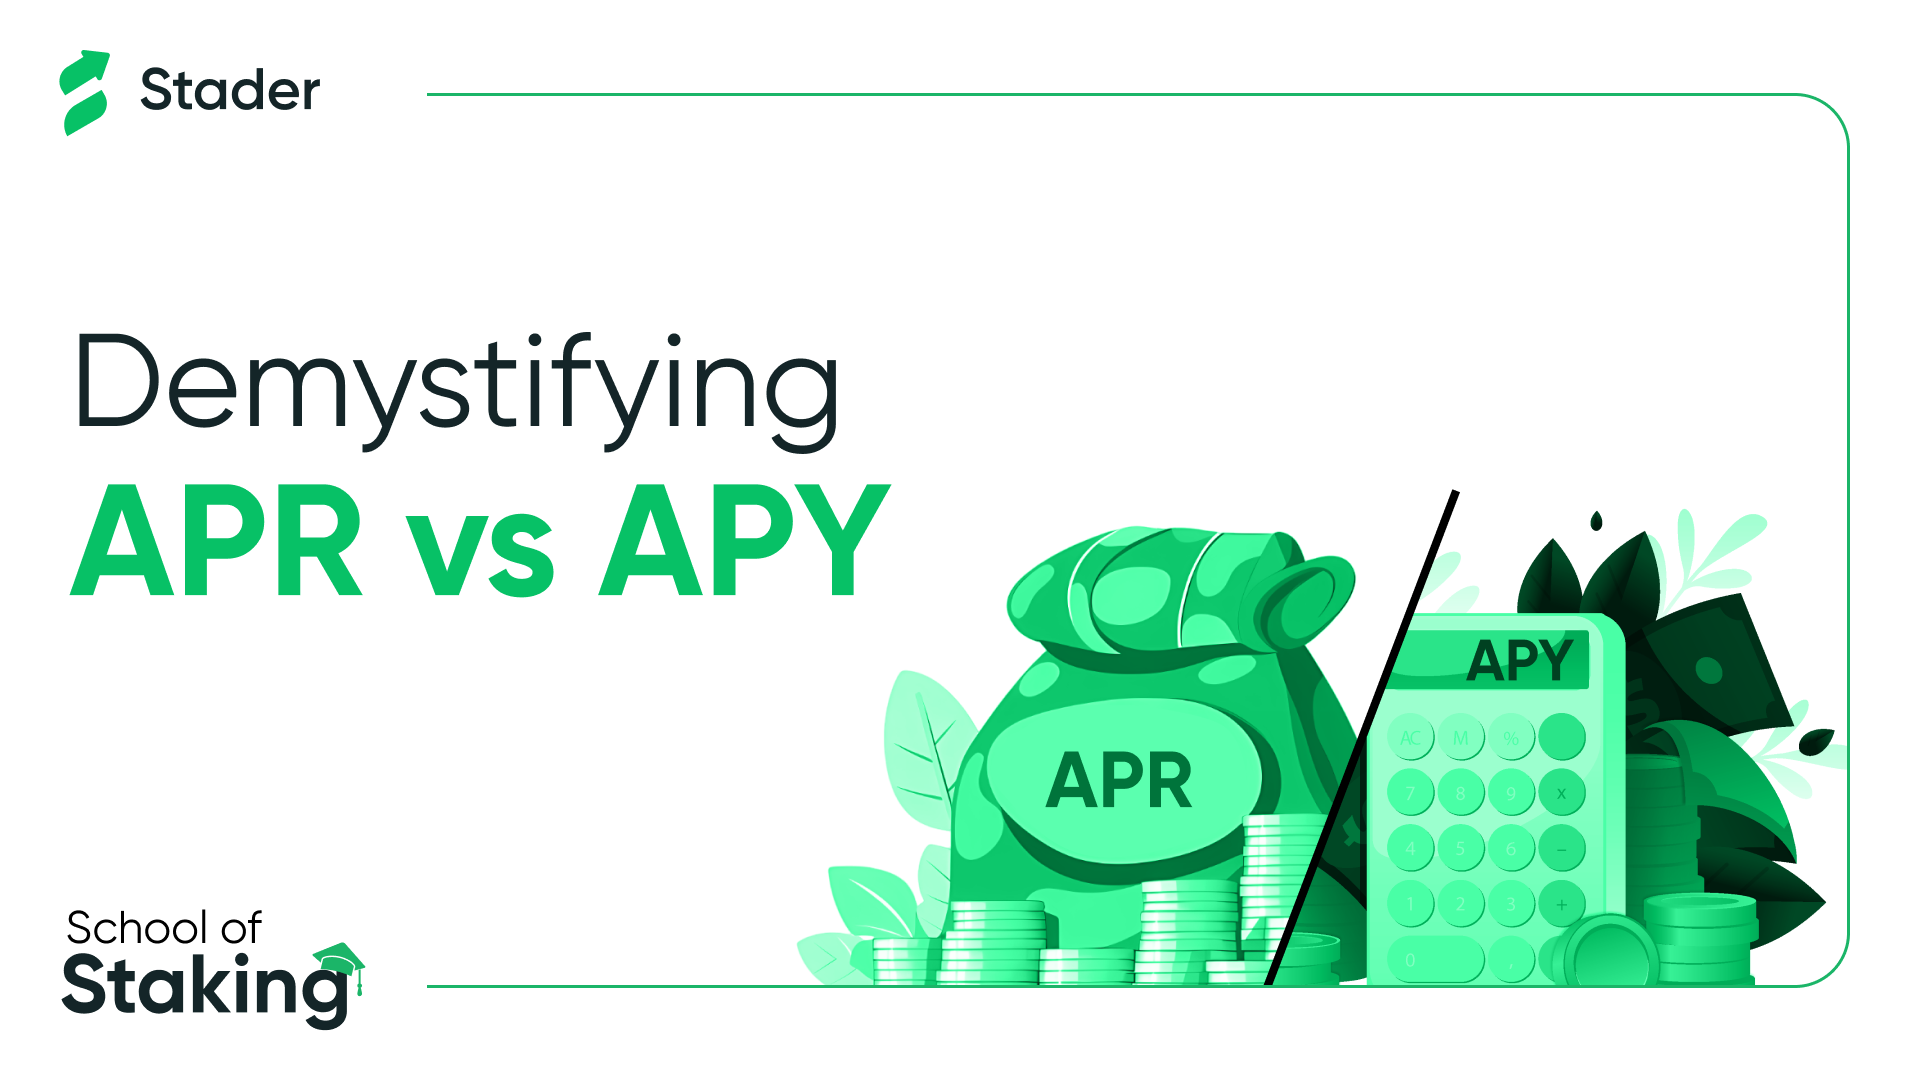 What's the difference between APR & APY